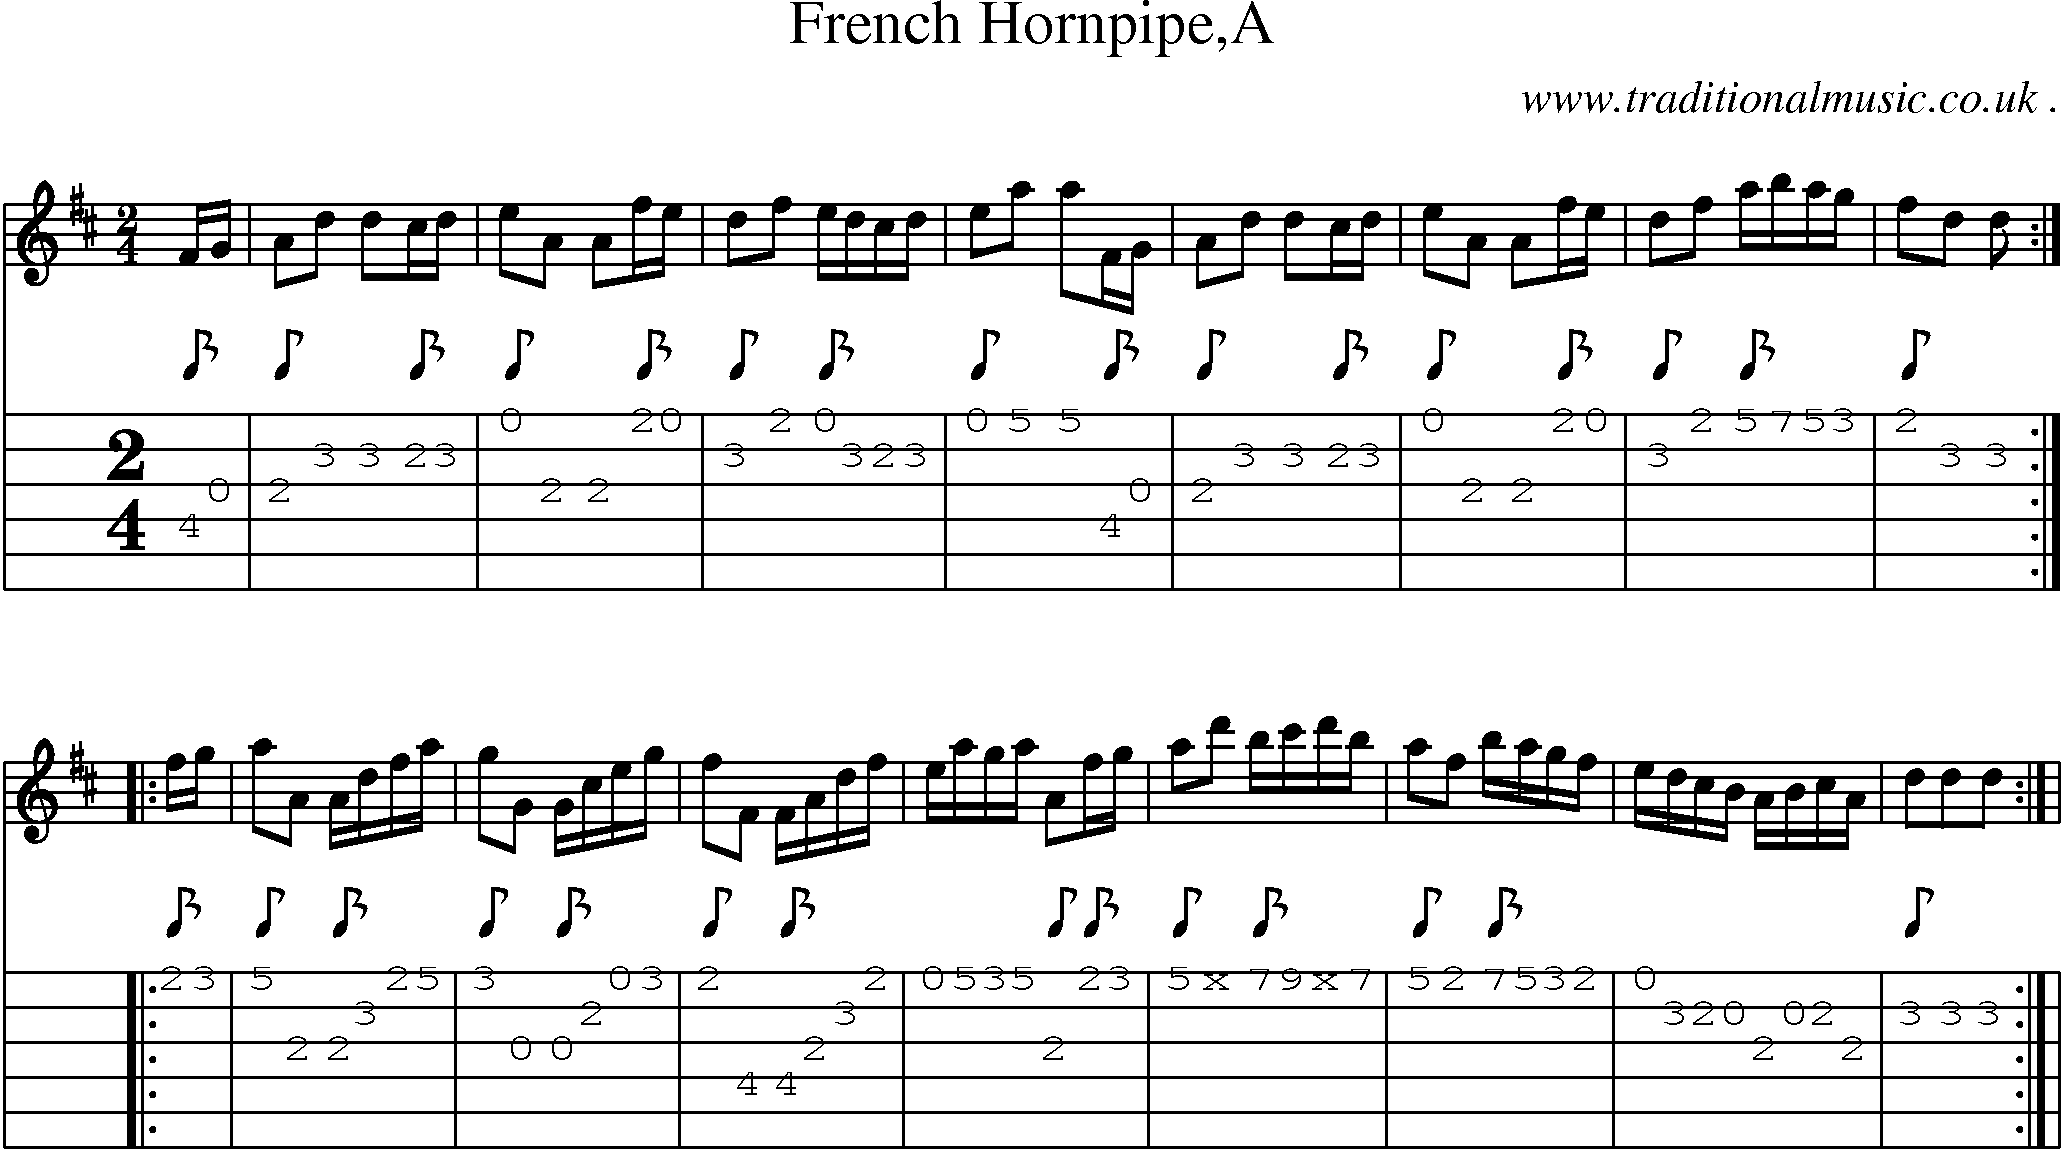 Sheet-Music and Guitar Tabs for French Hornpipea